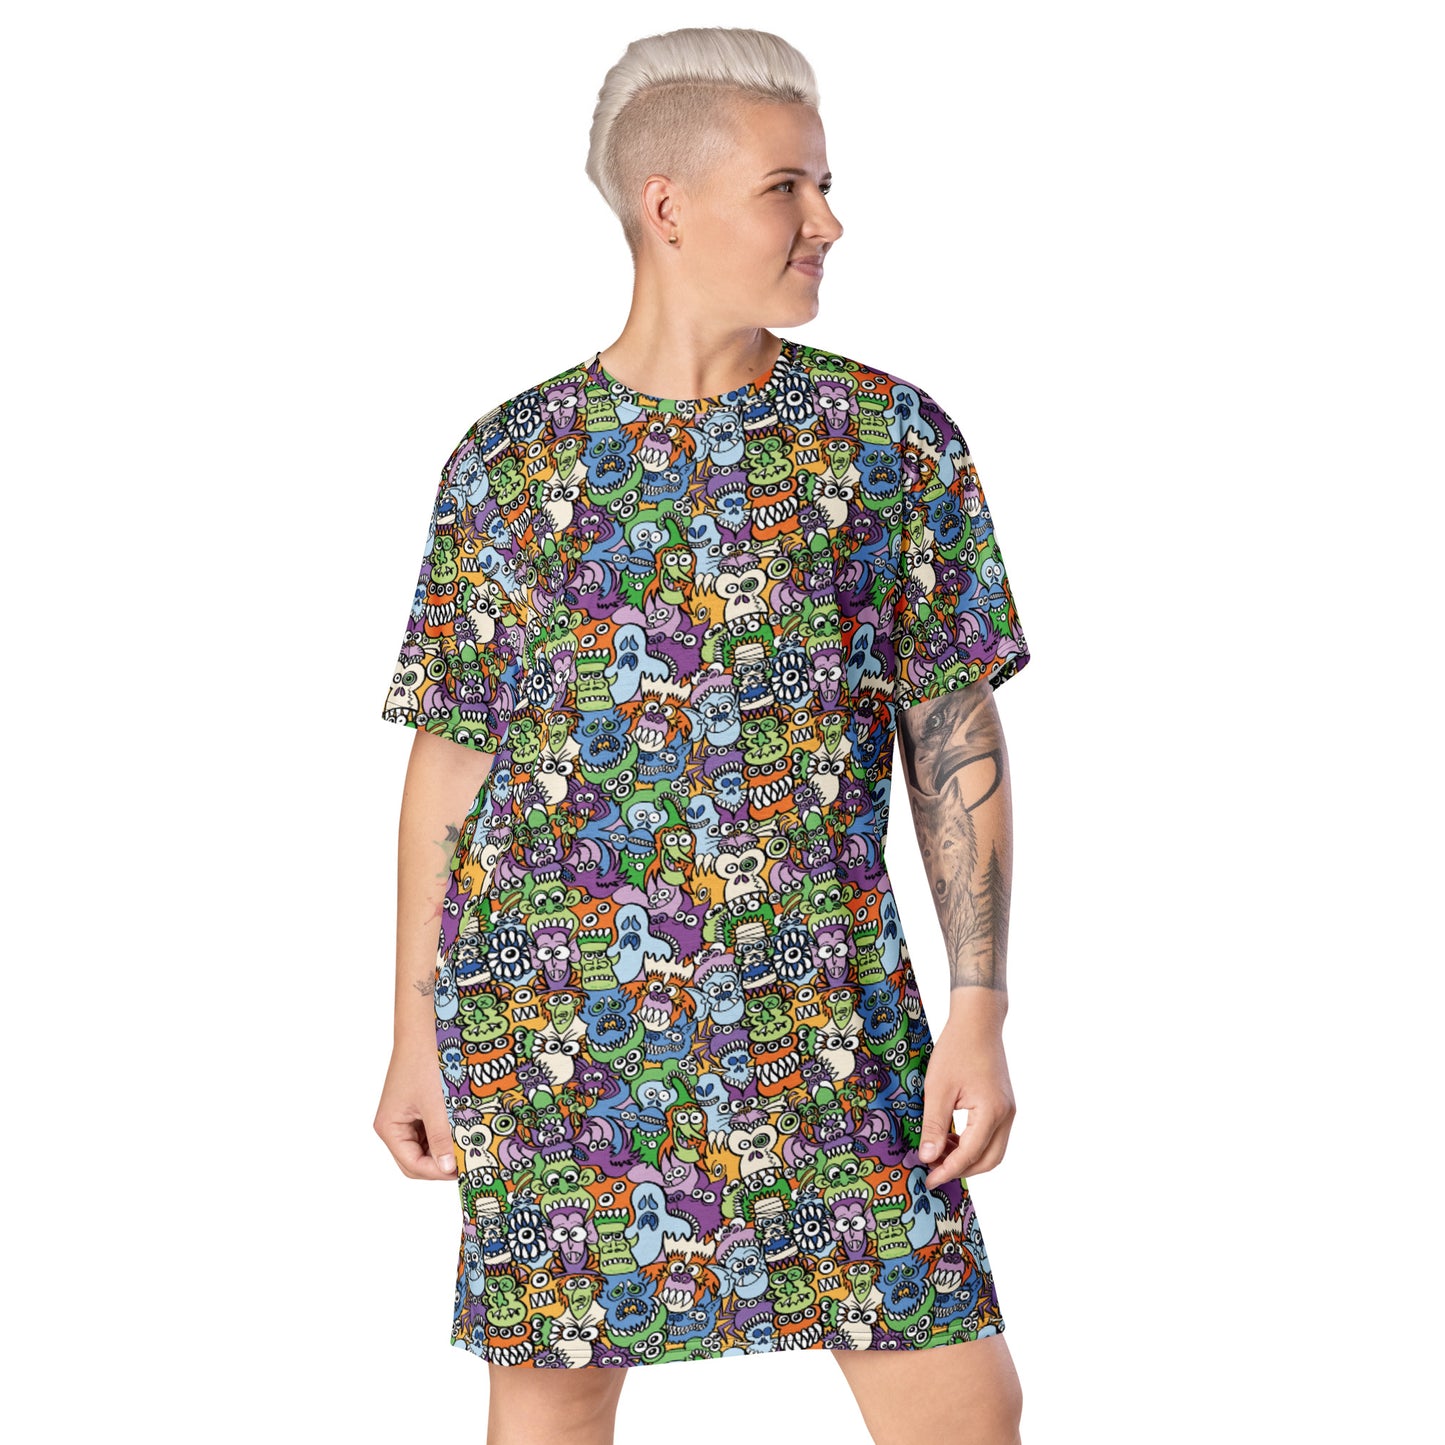 All the spooky Halloween monsters in a pattern design T-shirt dress. Front view